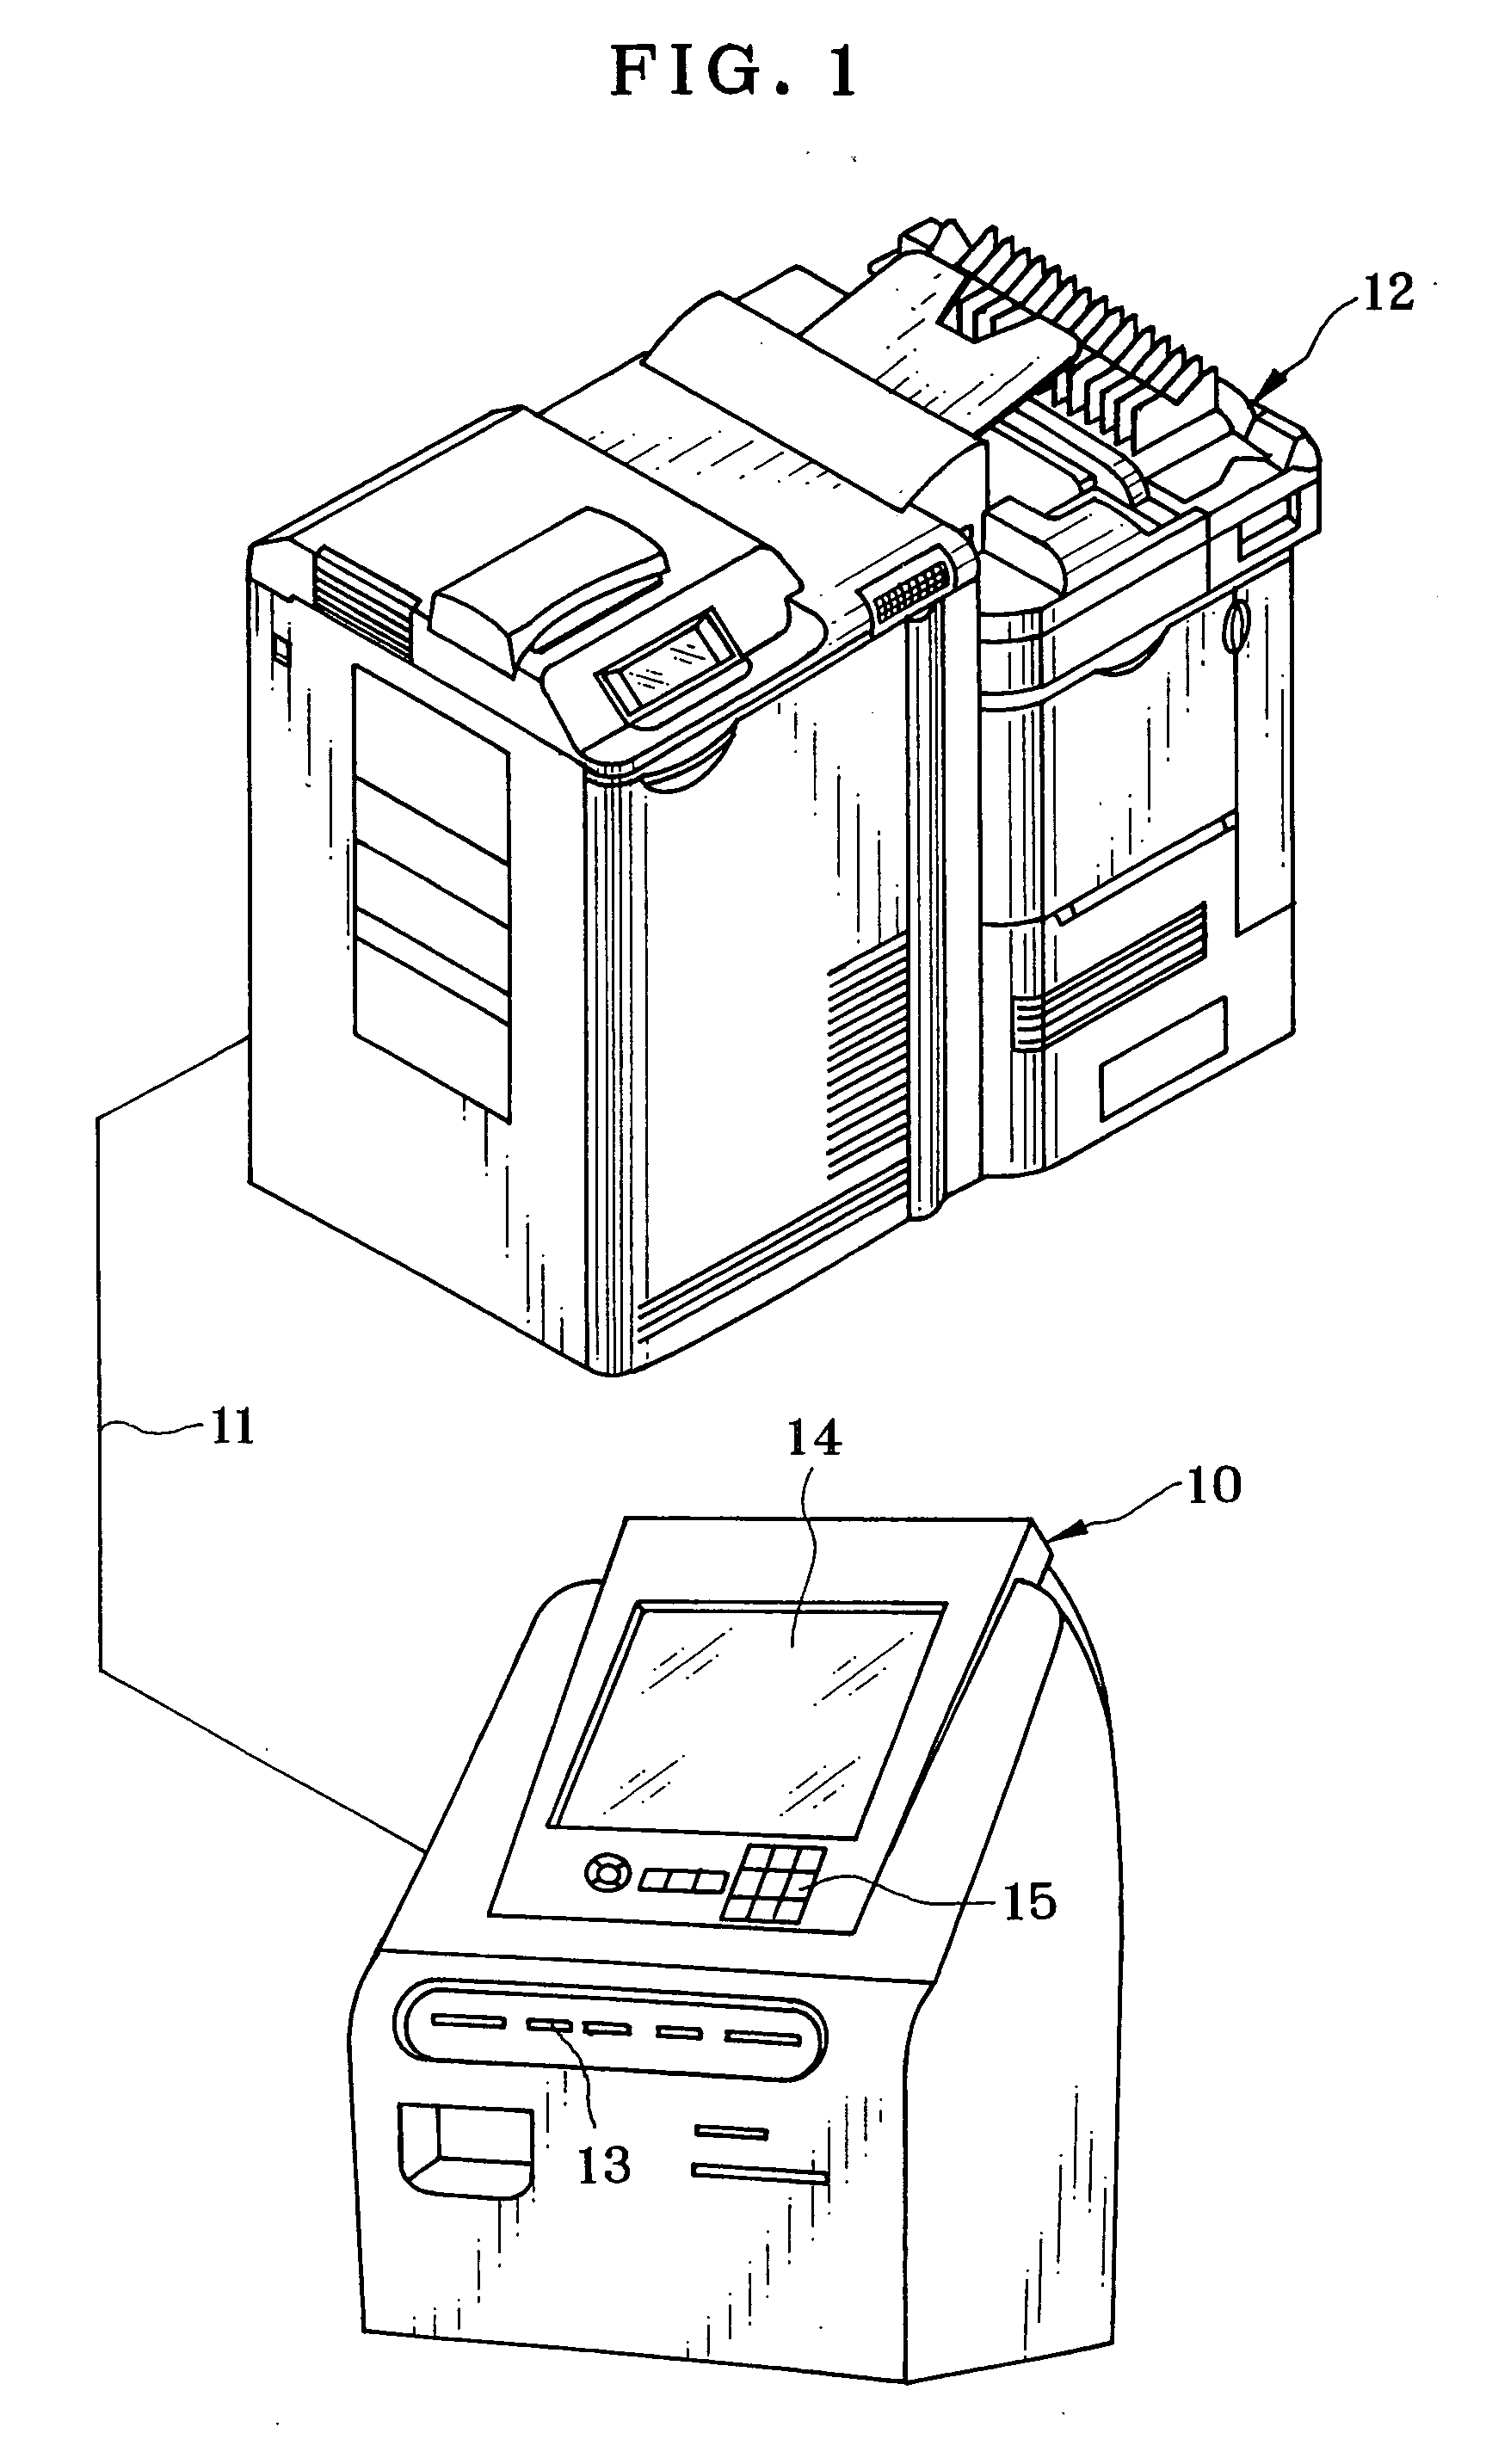 Order processing apparatus and method for printing